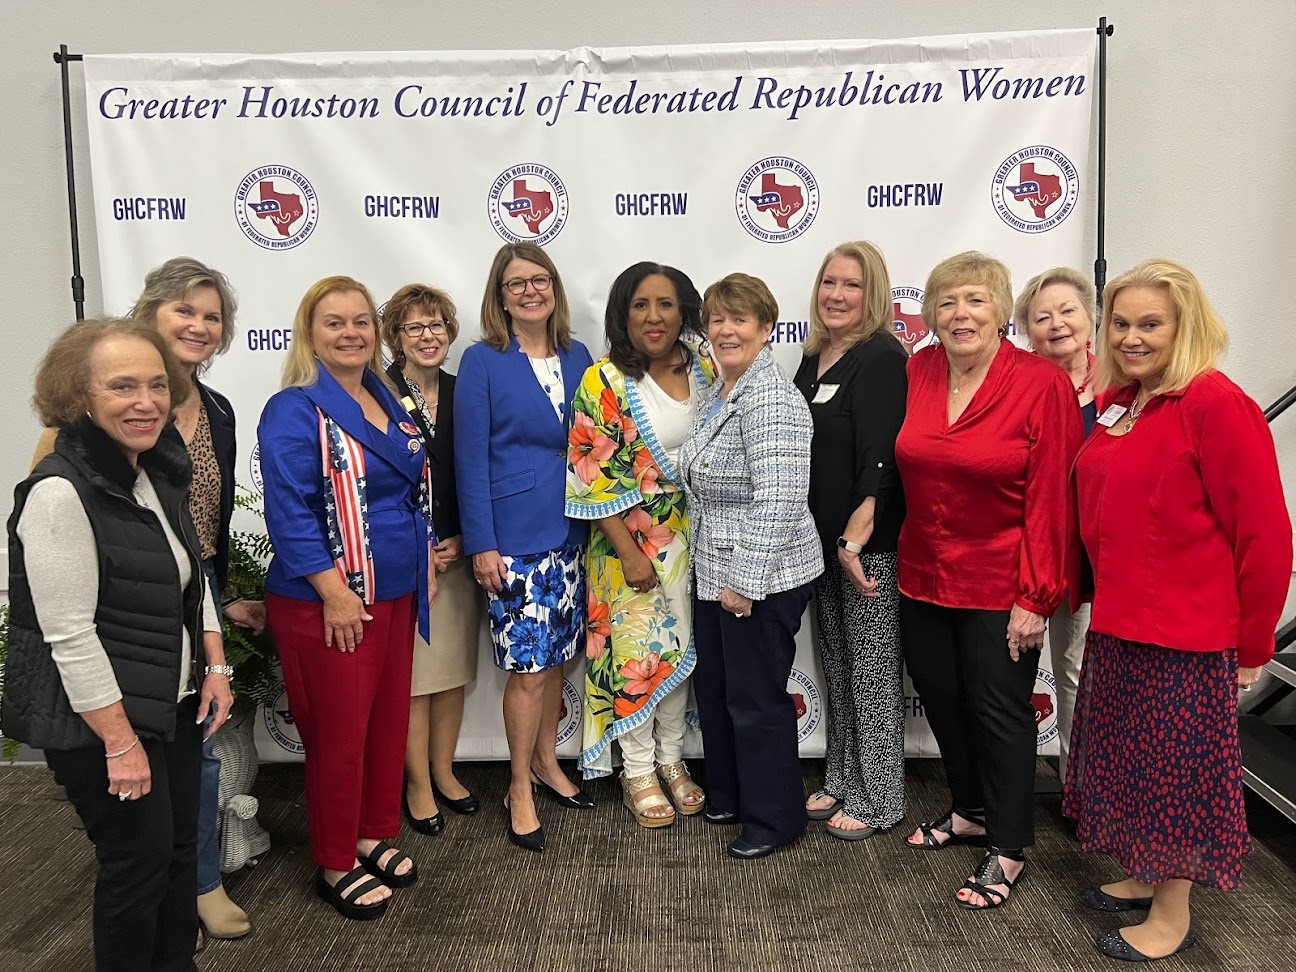 Greater Houston Council of Federated Republican Women